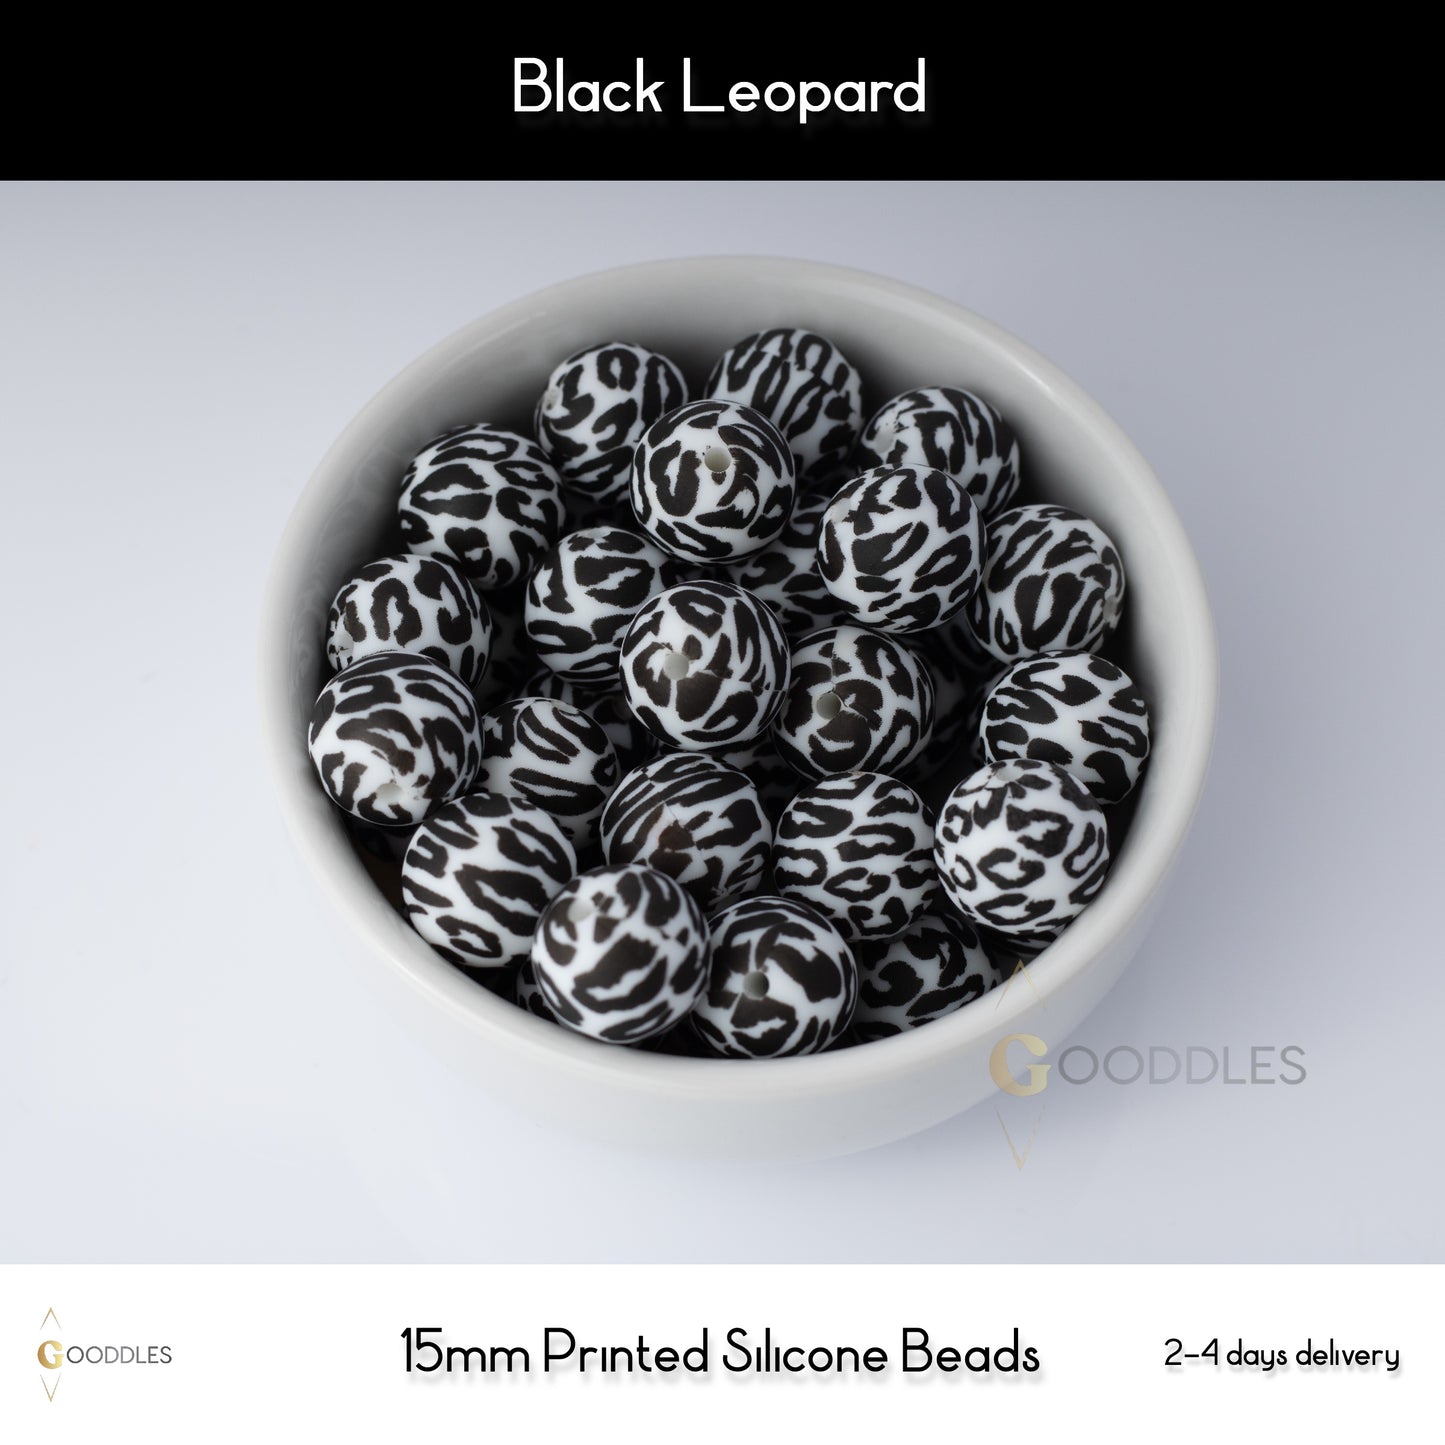 5pcs, Black Leopard Silicone Beads Printed Round Silicone Beads